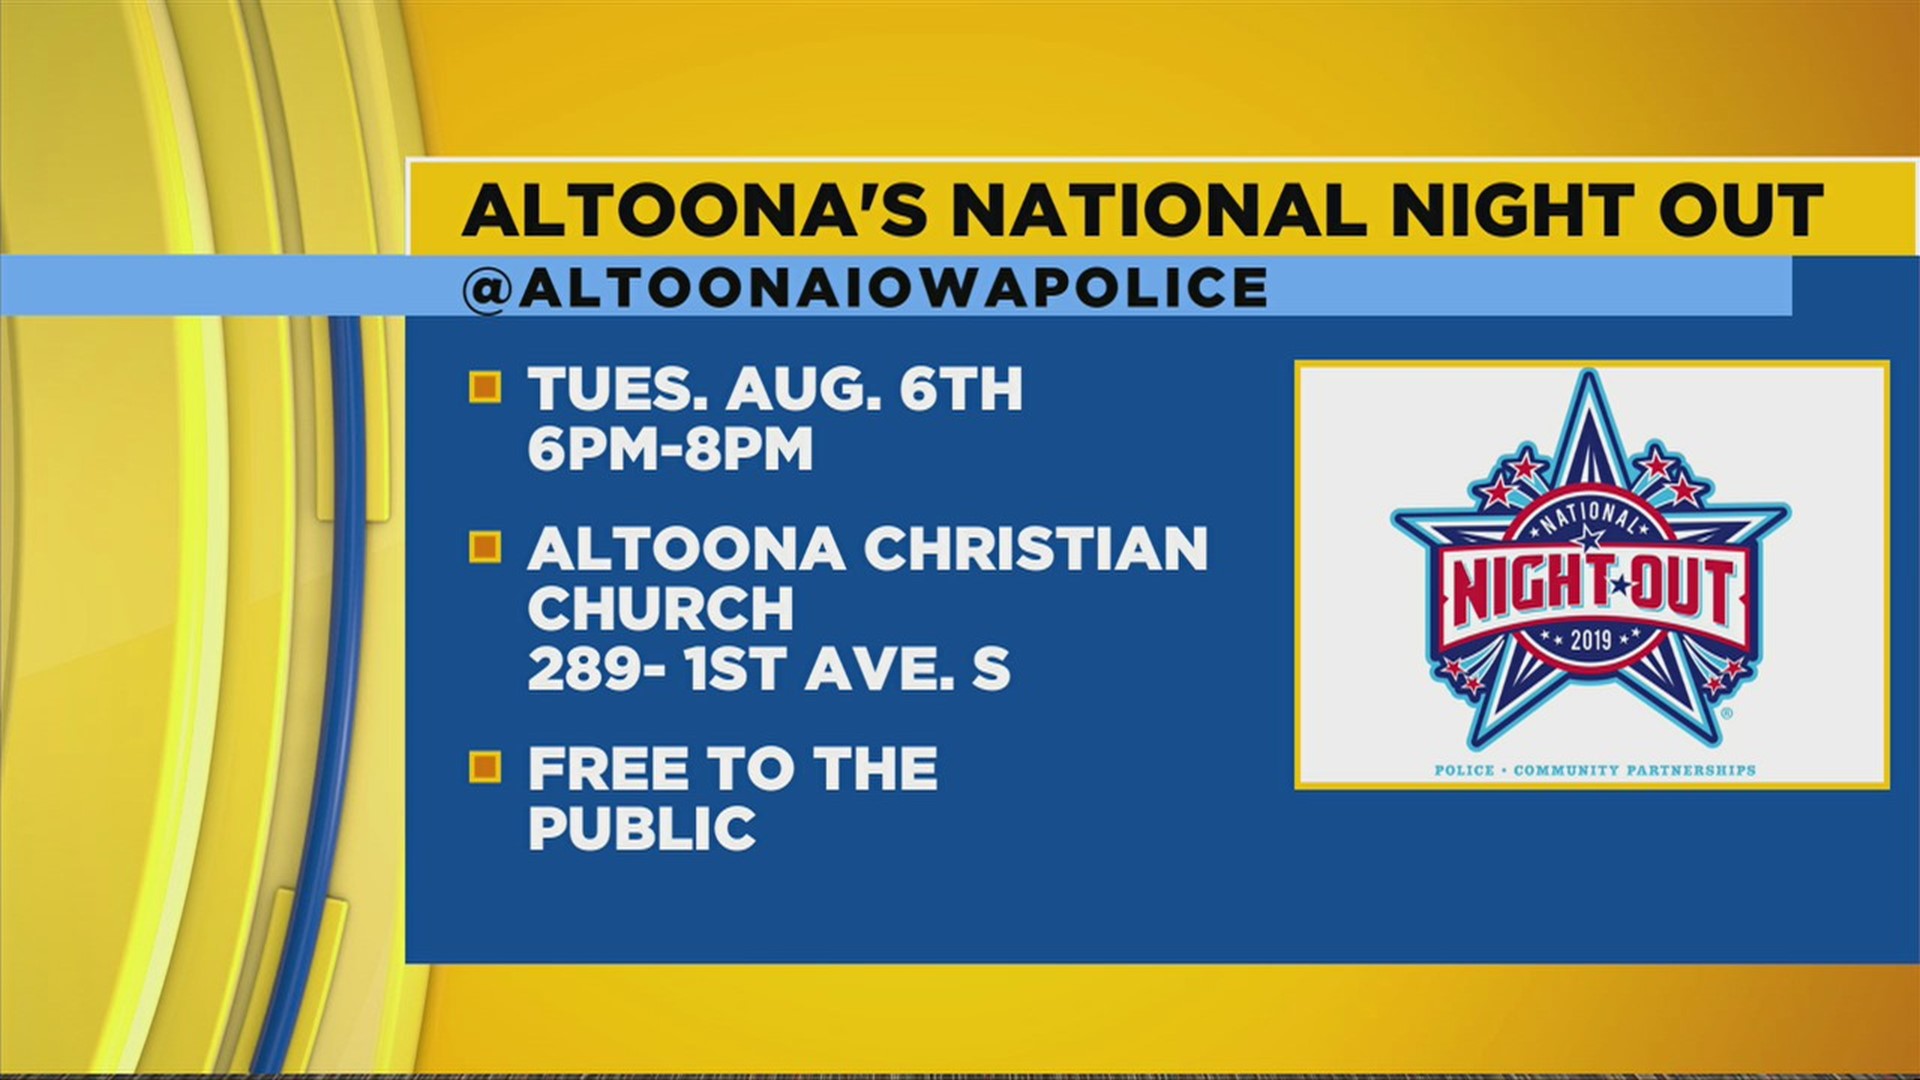 Altoona’s National Night Out